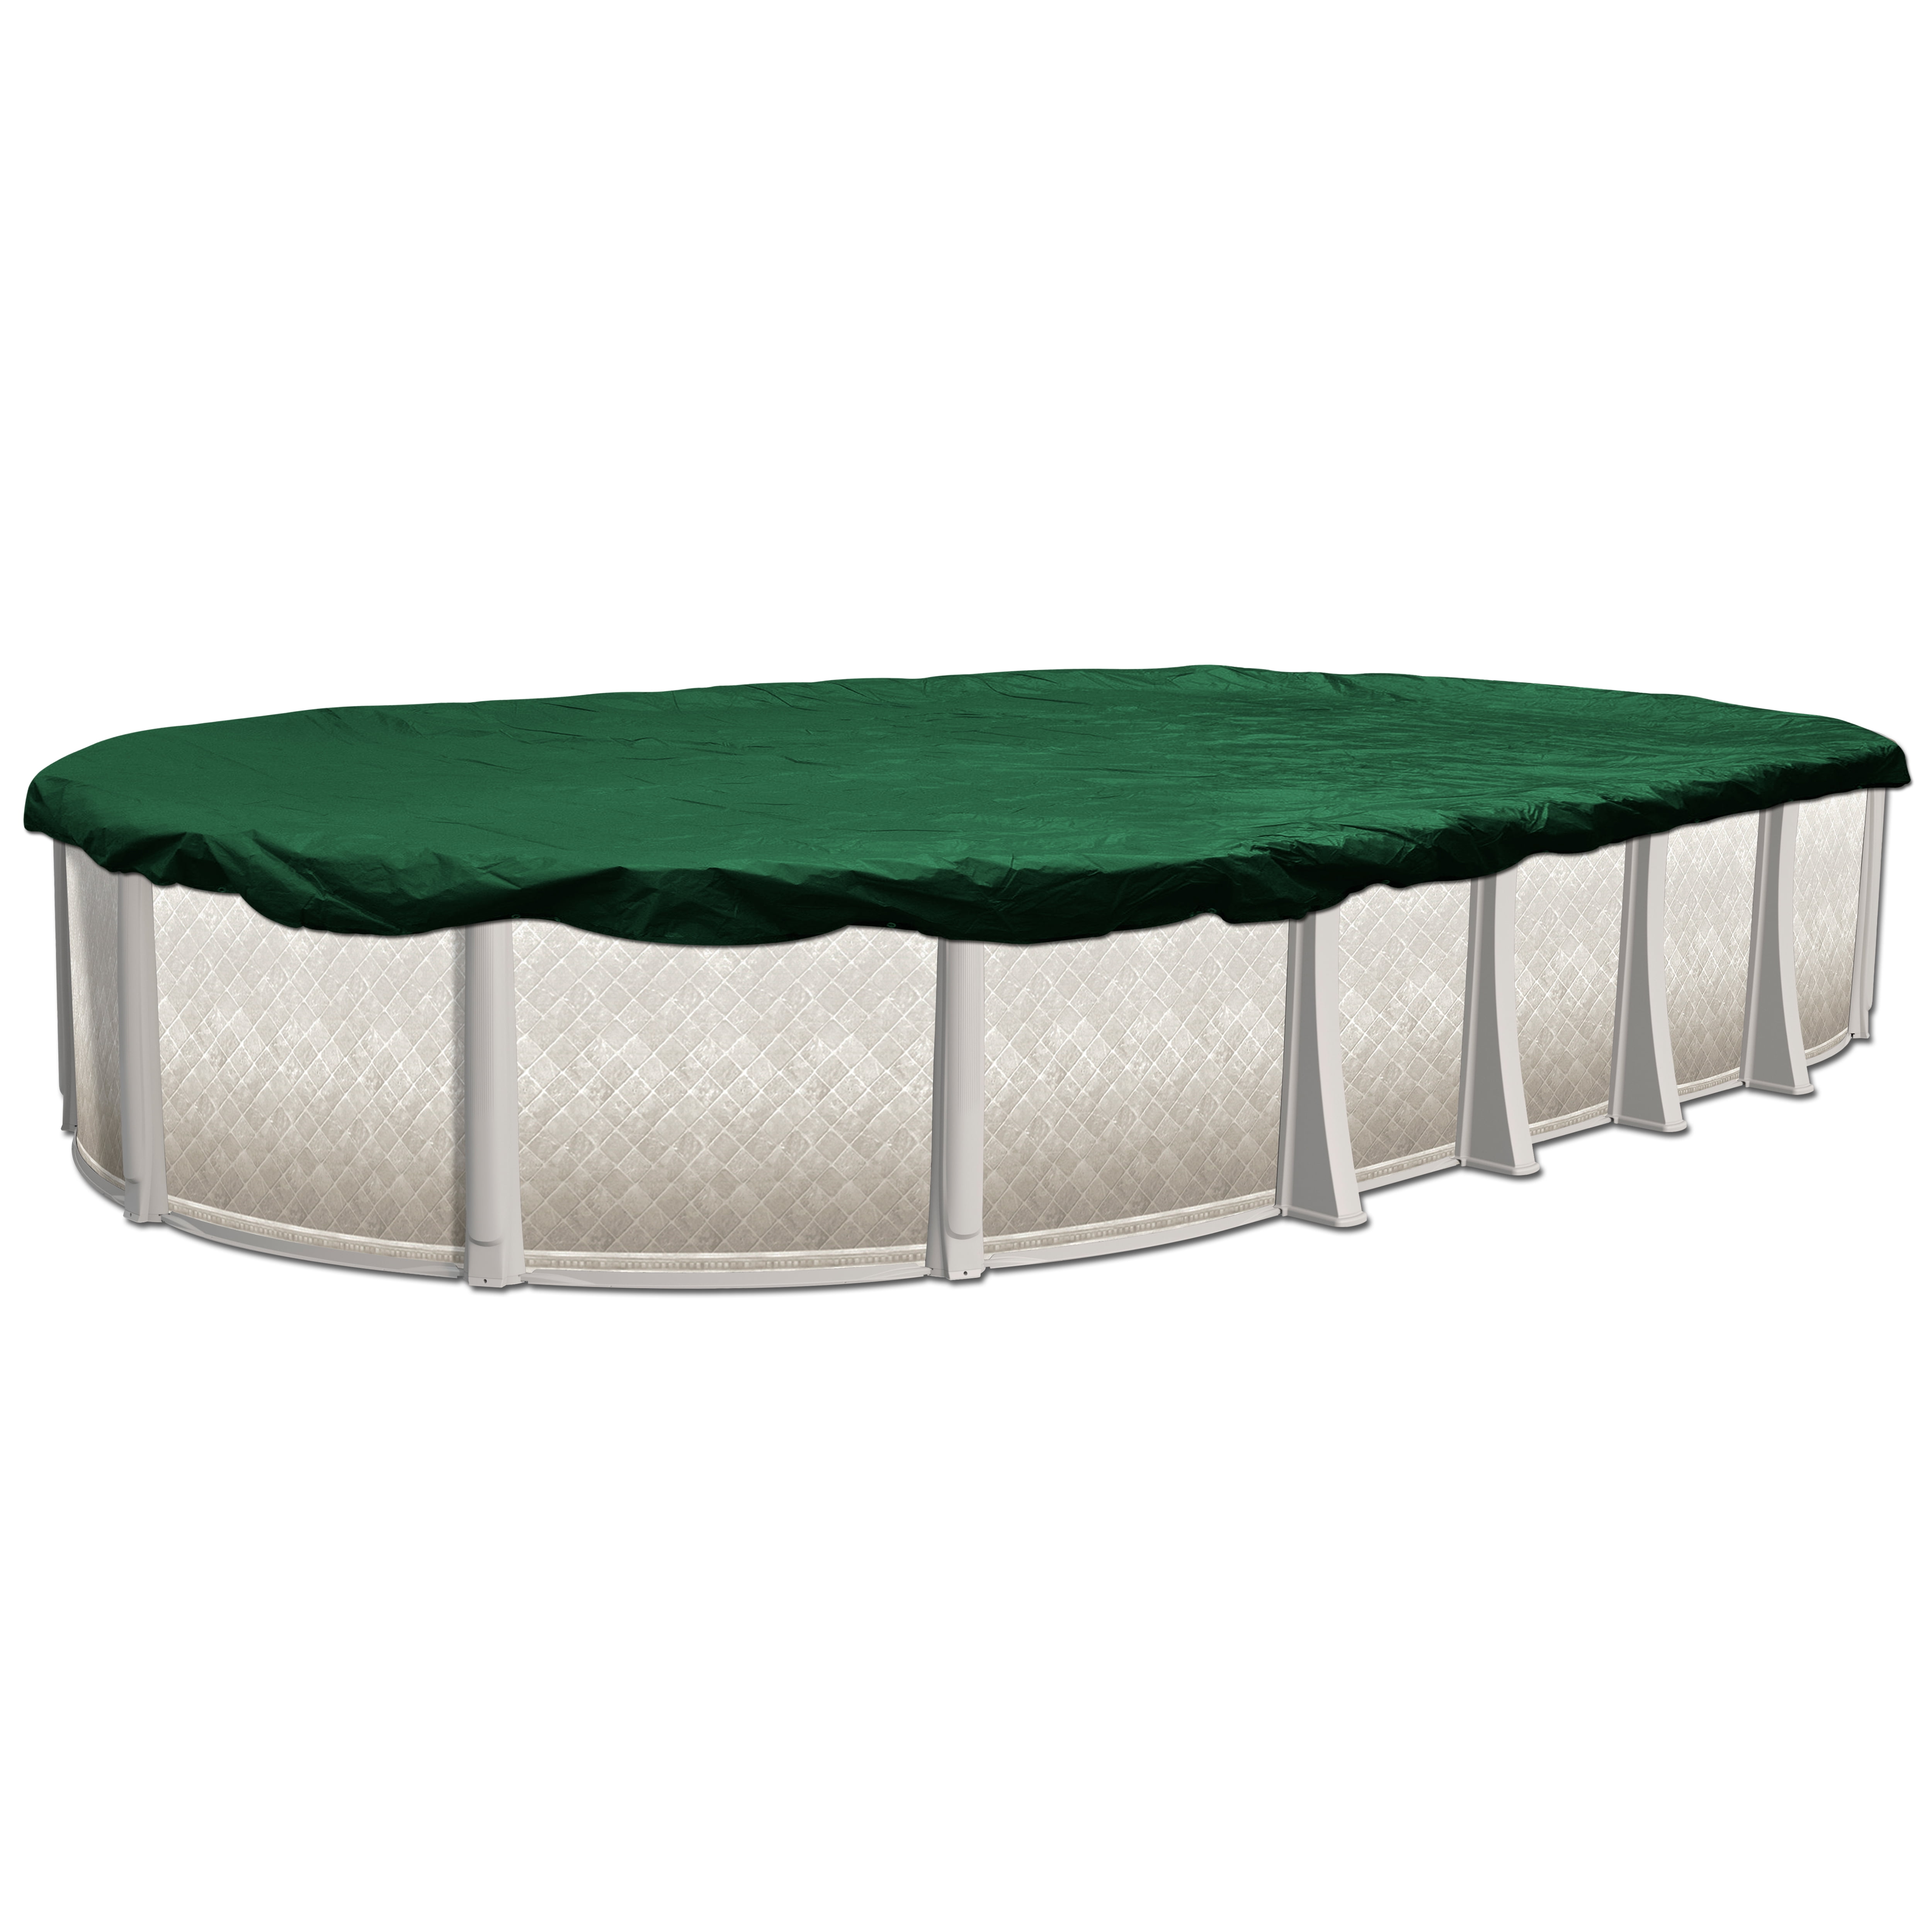 12Year 18 x 33 ft Oval Pool Winter Cover